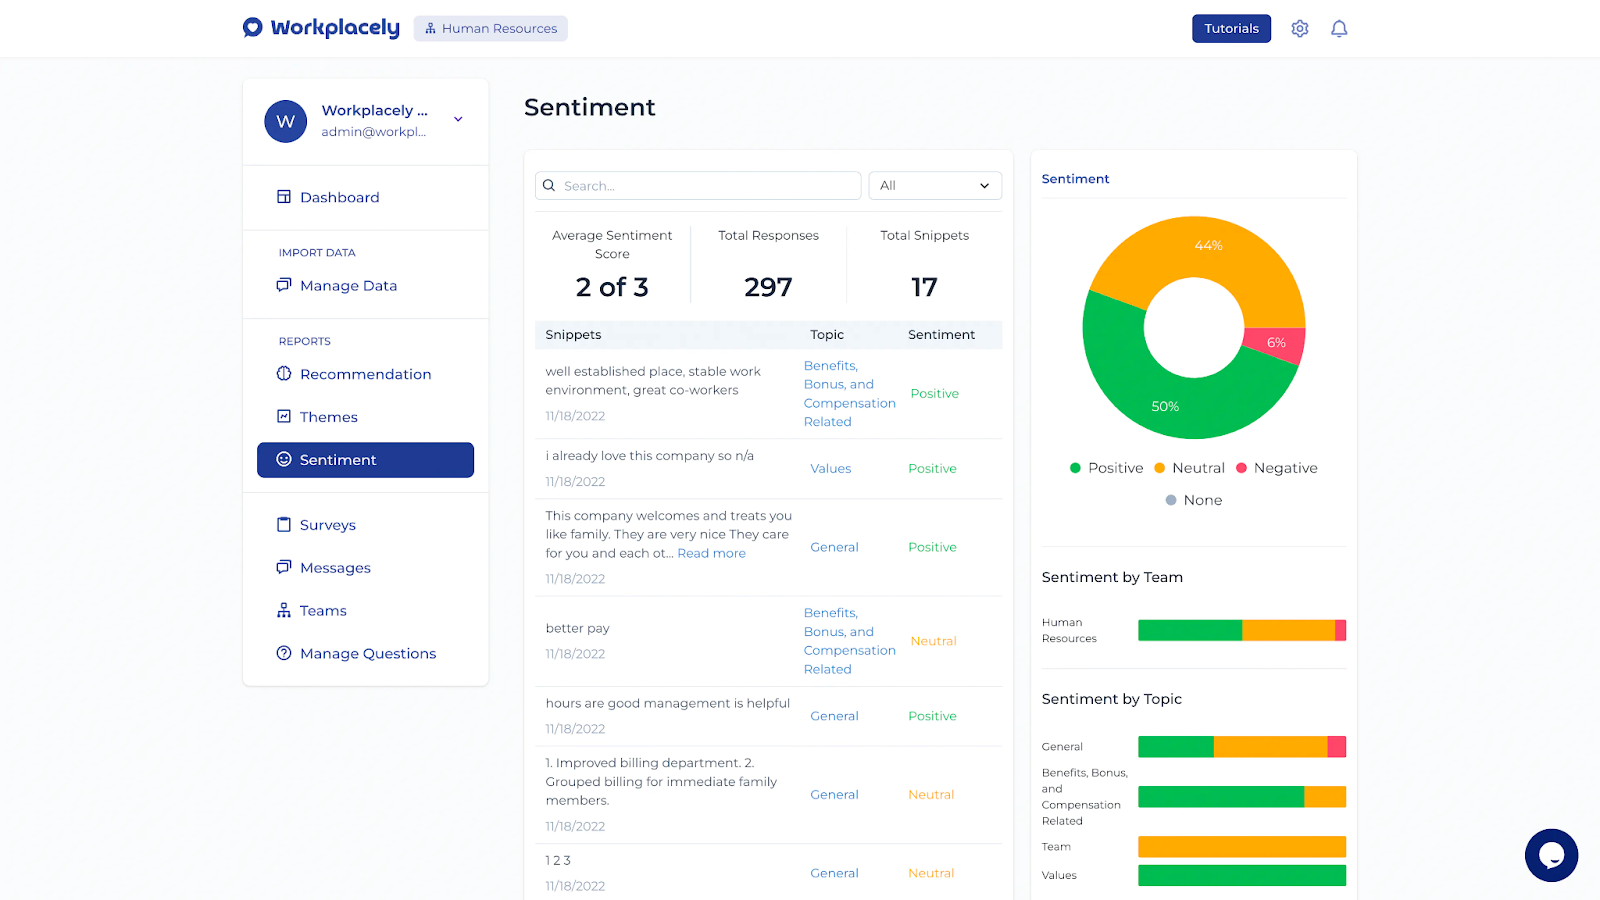 A screenshot of Workplacely's Sentiment dashboard showing total responses and sentiment score (positive/negative/neutral) filtered by average, team, and topic.